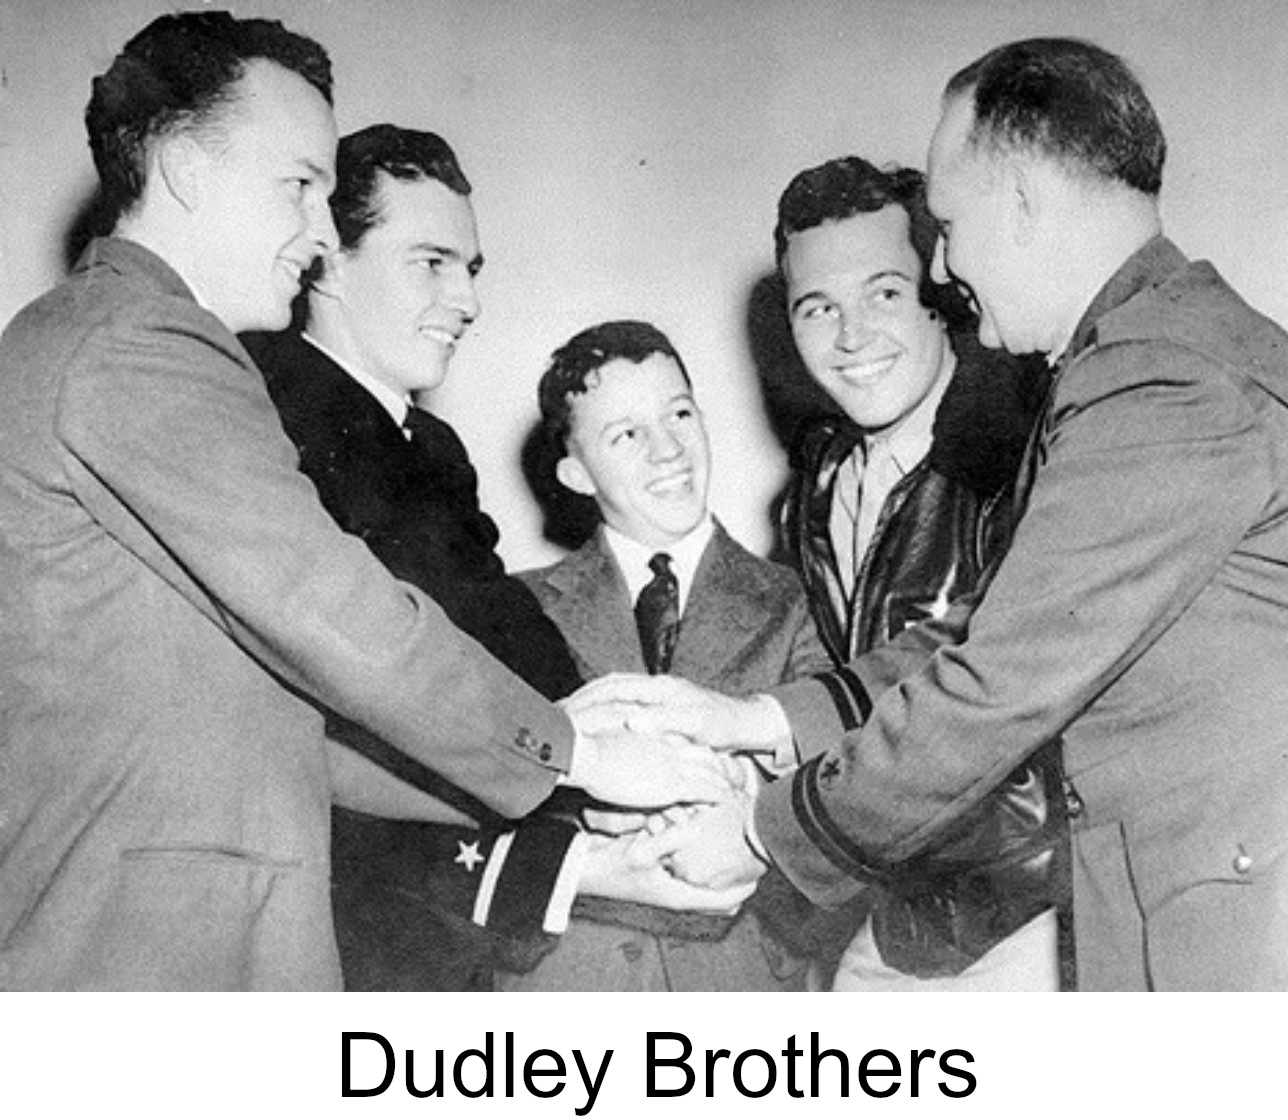 Dudley Brothers